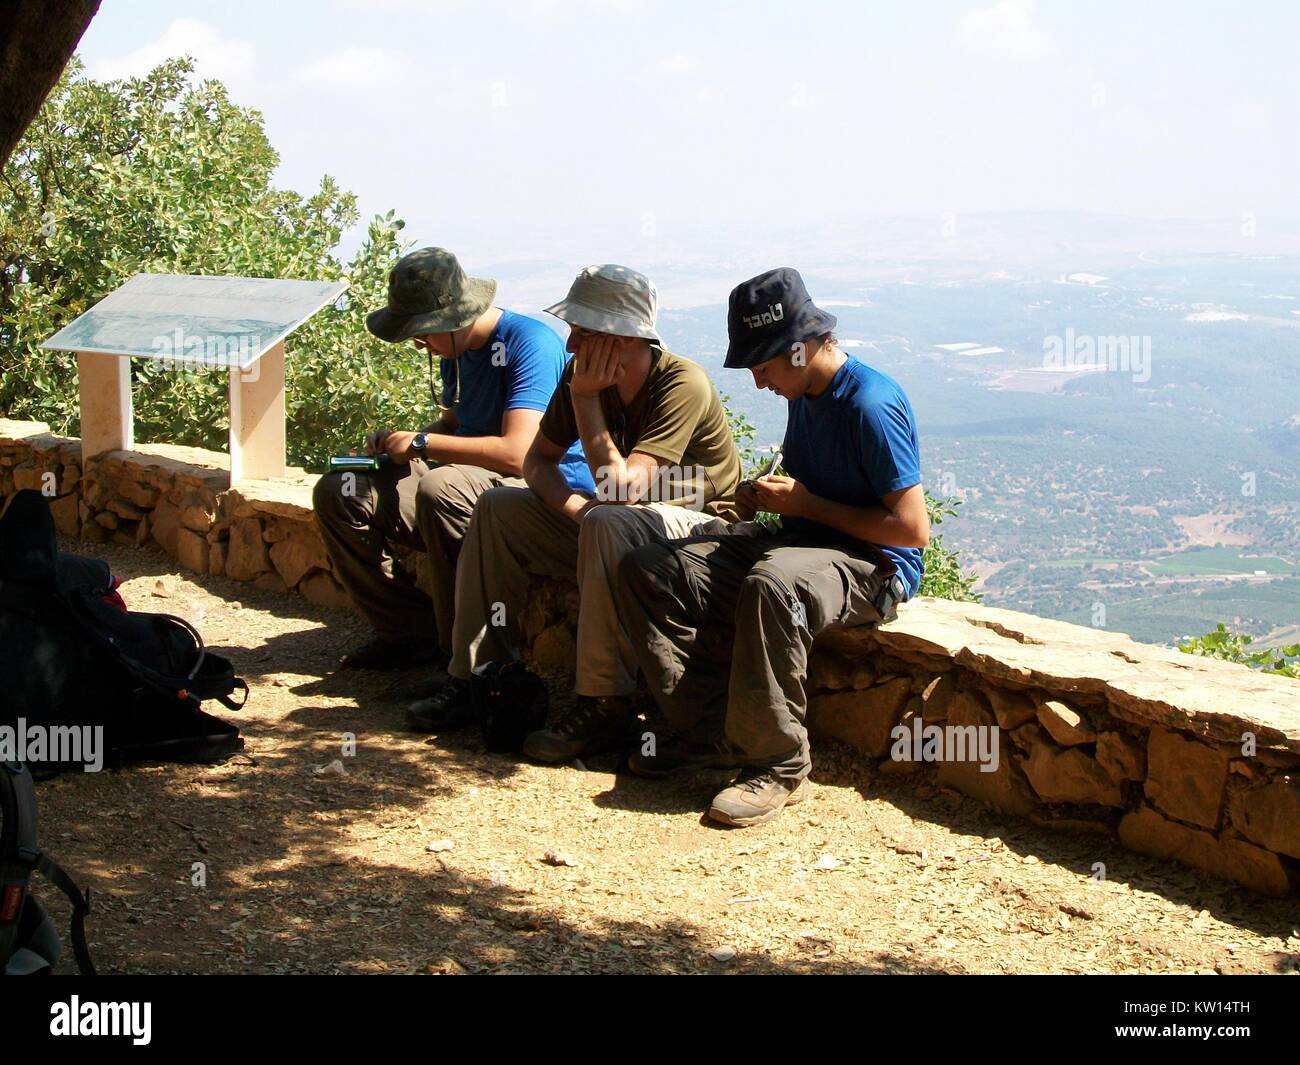 On Mount Benthal, three Israel hikers wearing matching khaki military pants and wide-brimmed hats rest on a stone wall, with their backpacks visible in the foreground, Mount Benthal, Golan Heights, Israel, 2012. Stock Photo